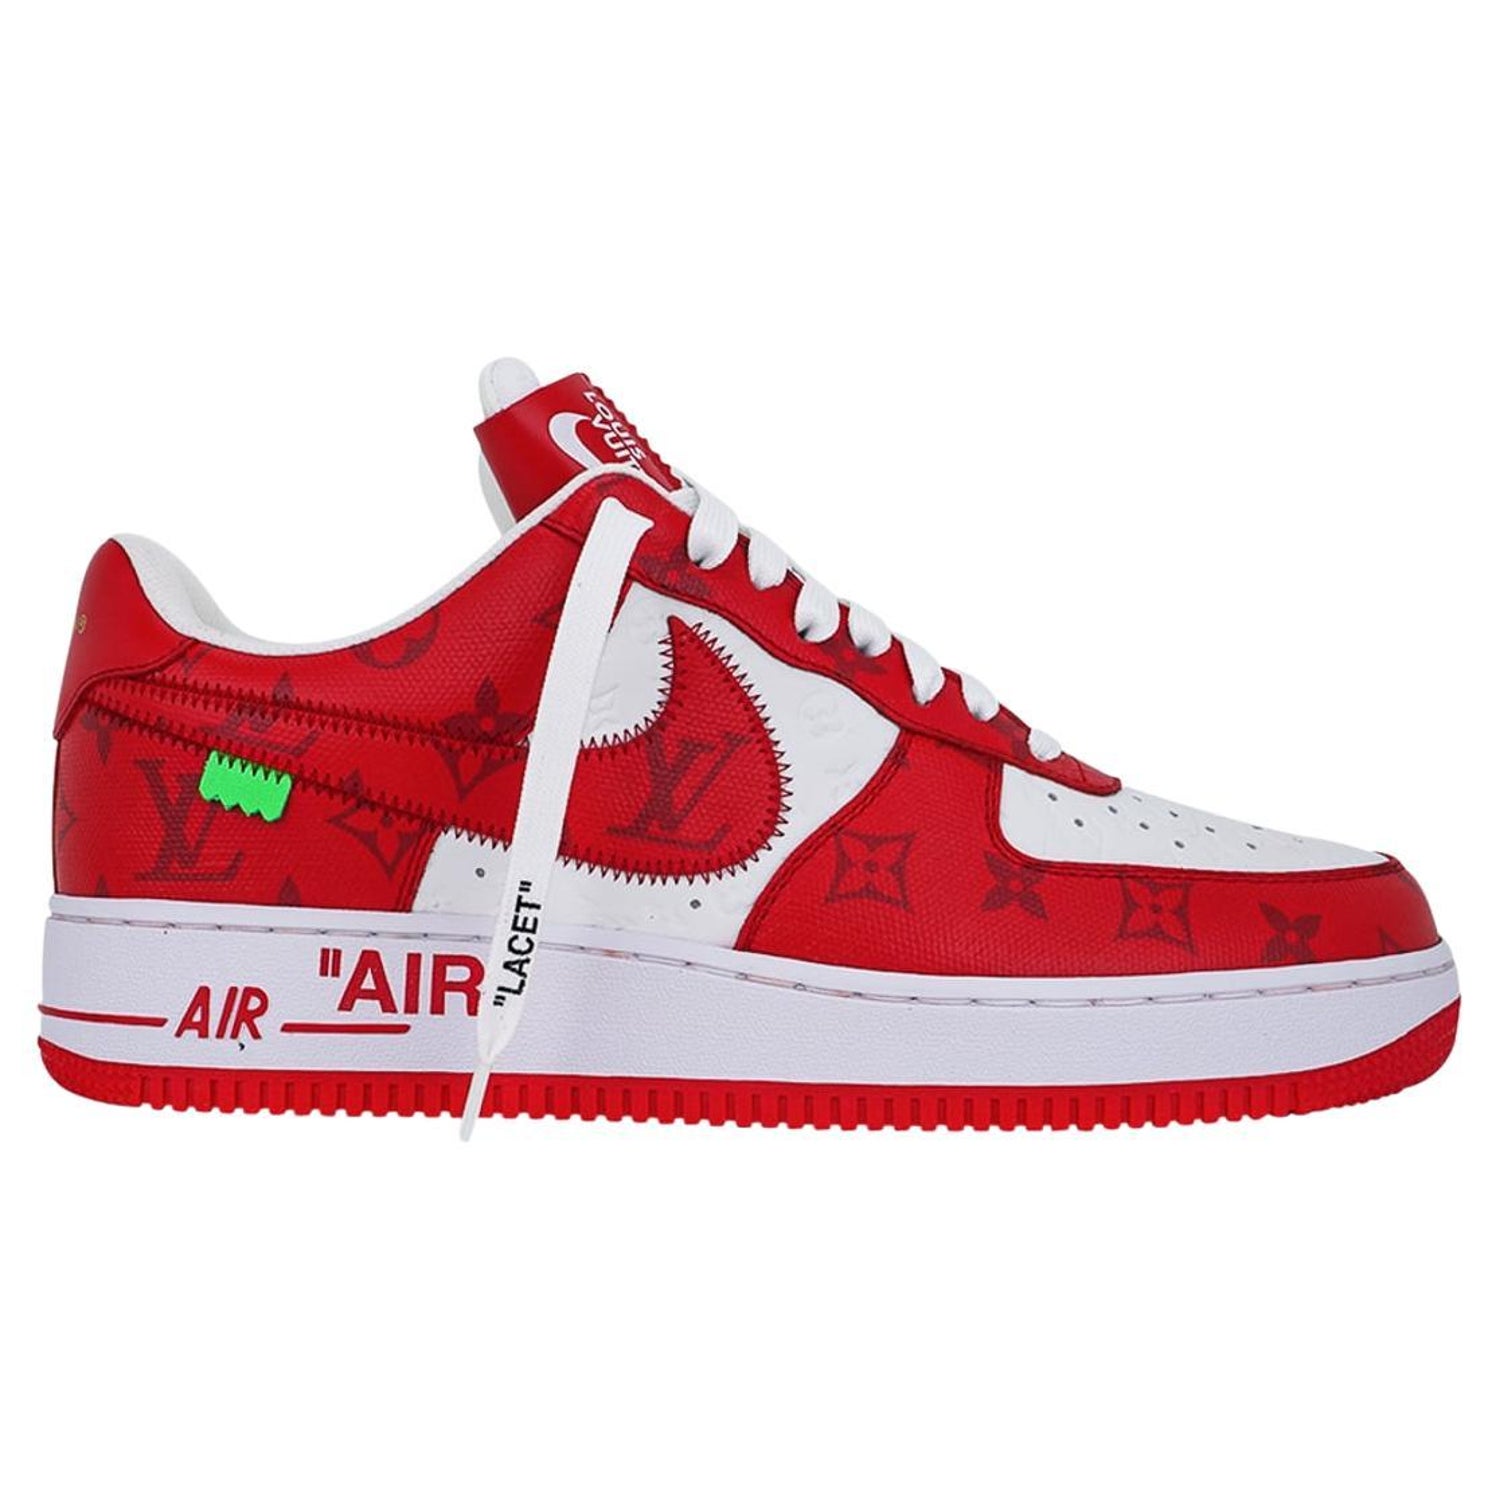 Louis Vuitton x Nike Air Force 1 Monogram Sneakers w/ Tags - White  Sneakers, Shoes - LOVIN20115